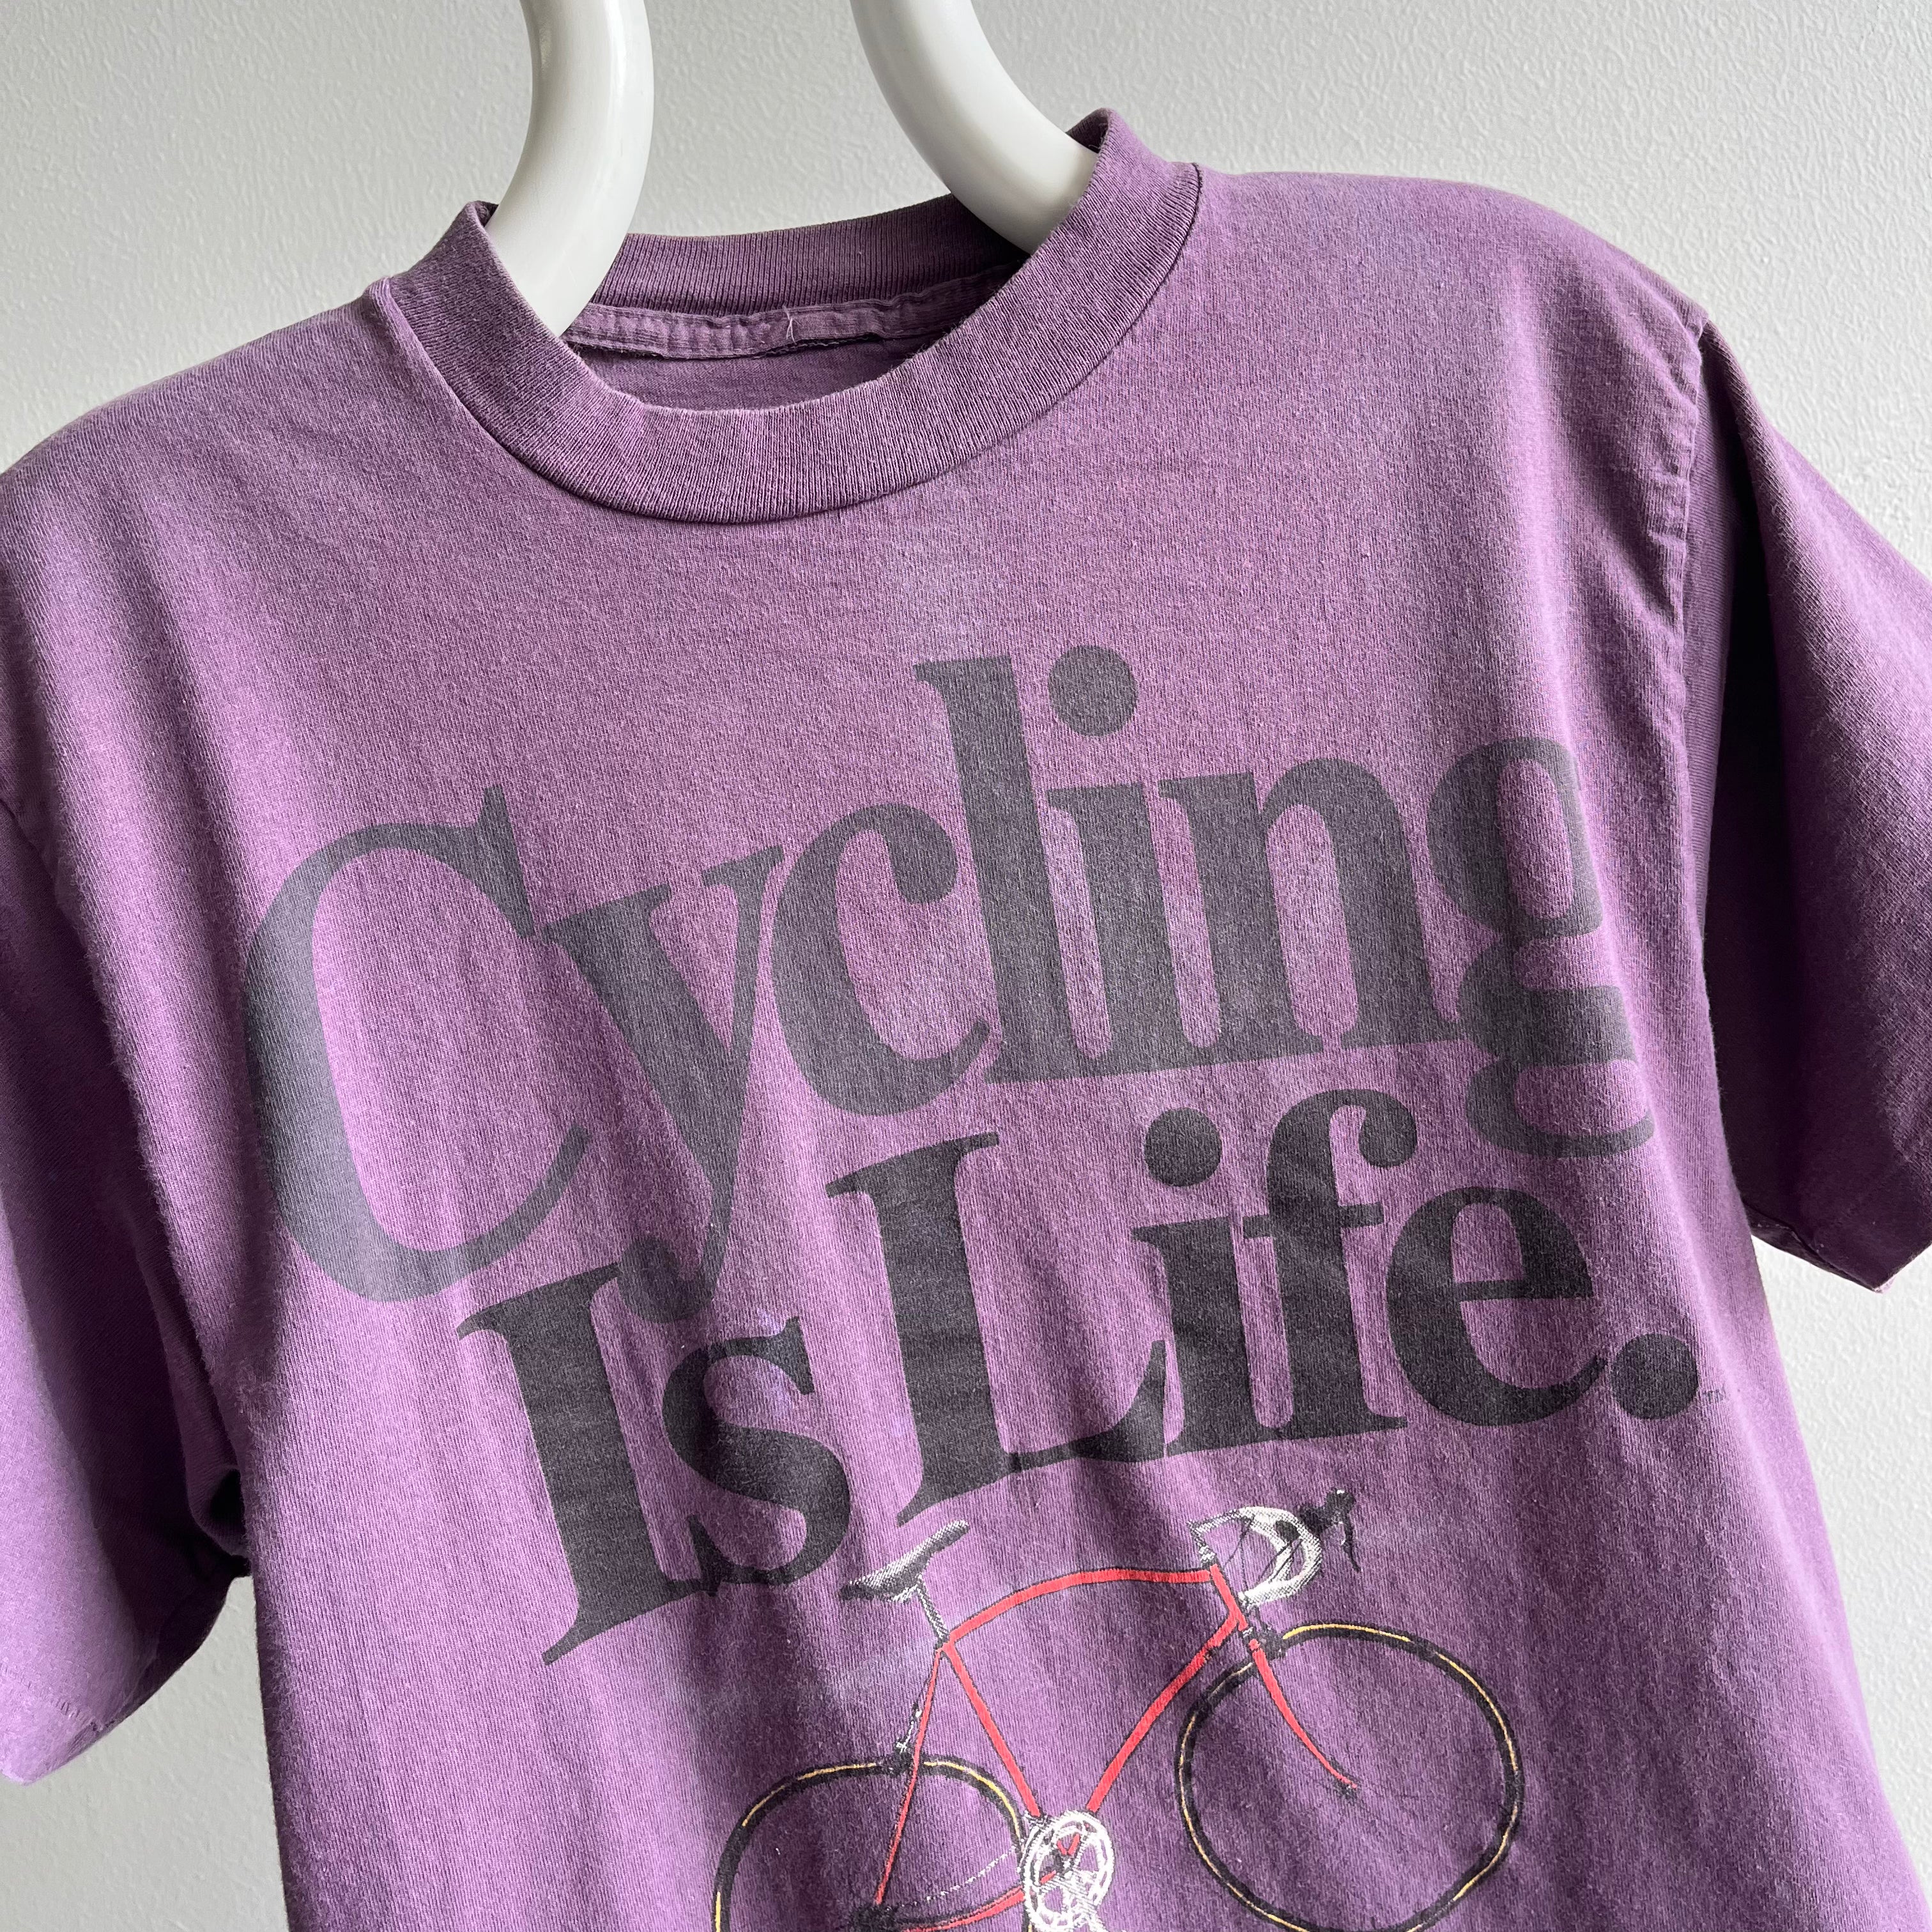 1990 Cycling is Life T-Shirt